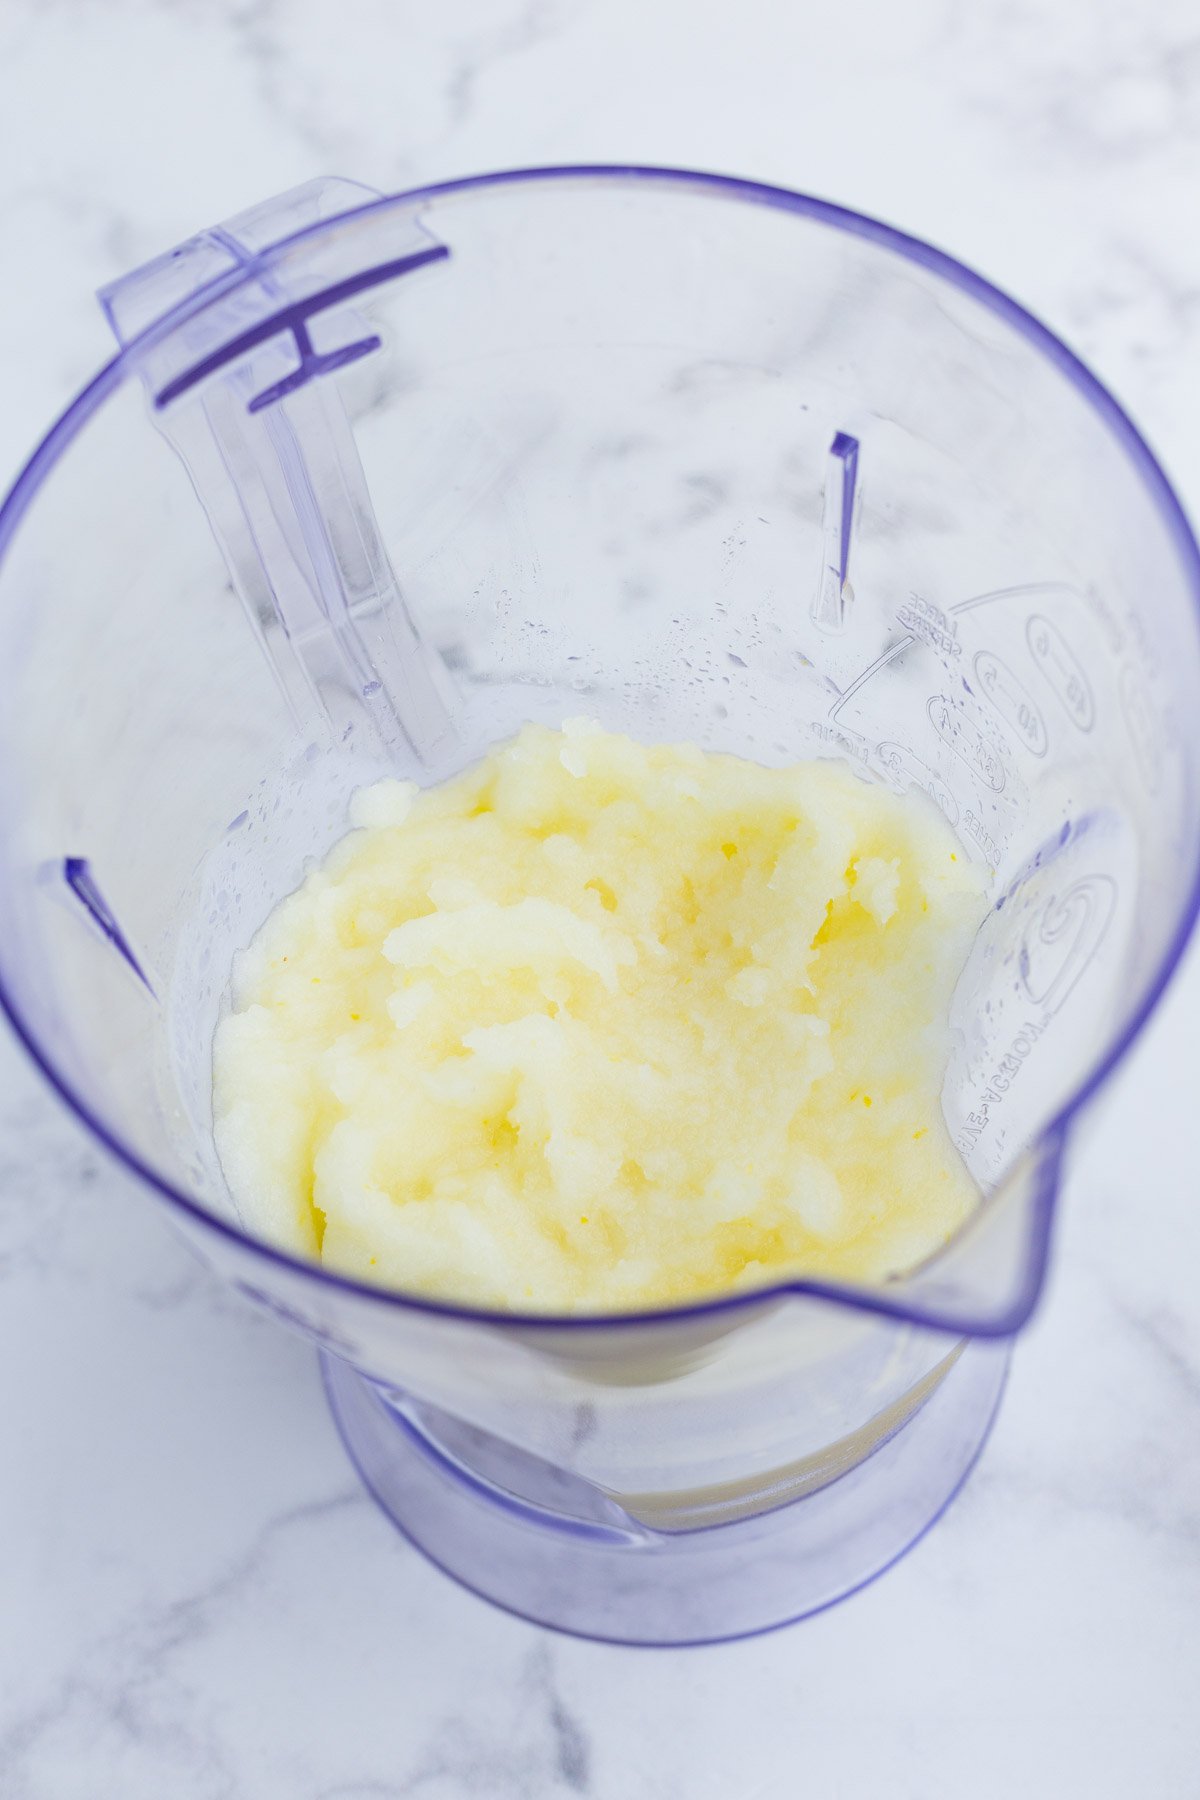 Frozen sorbet is blended until creamy and smooth.